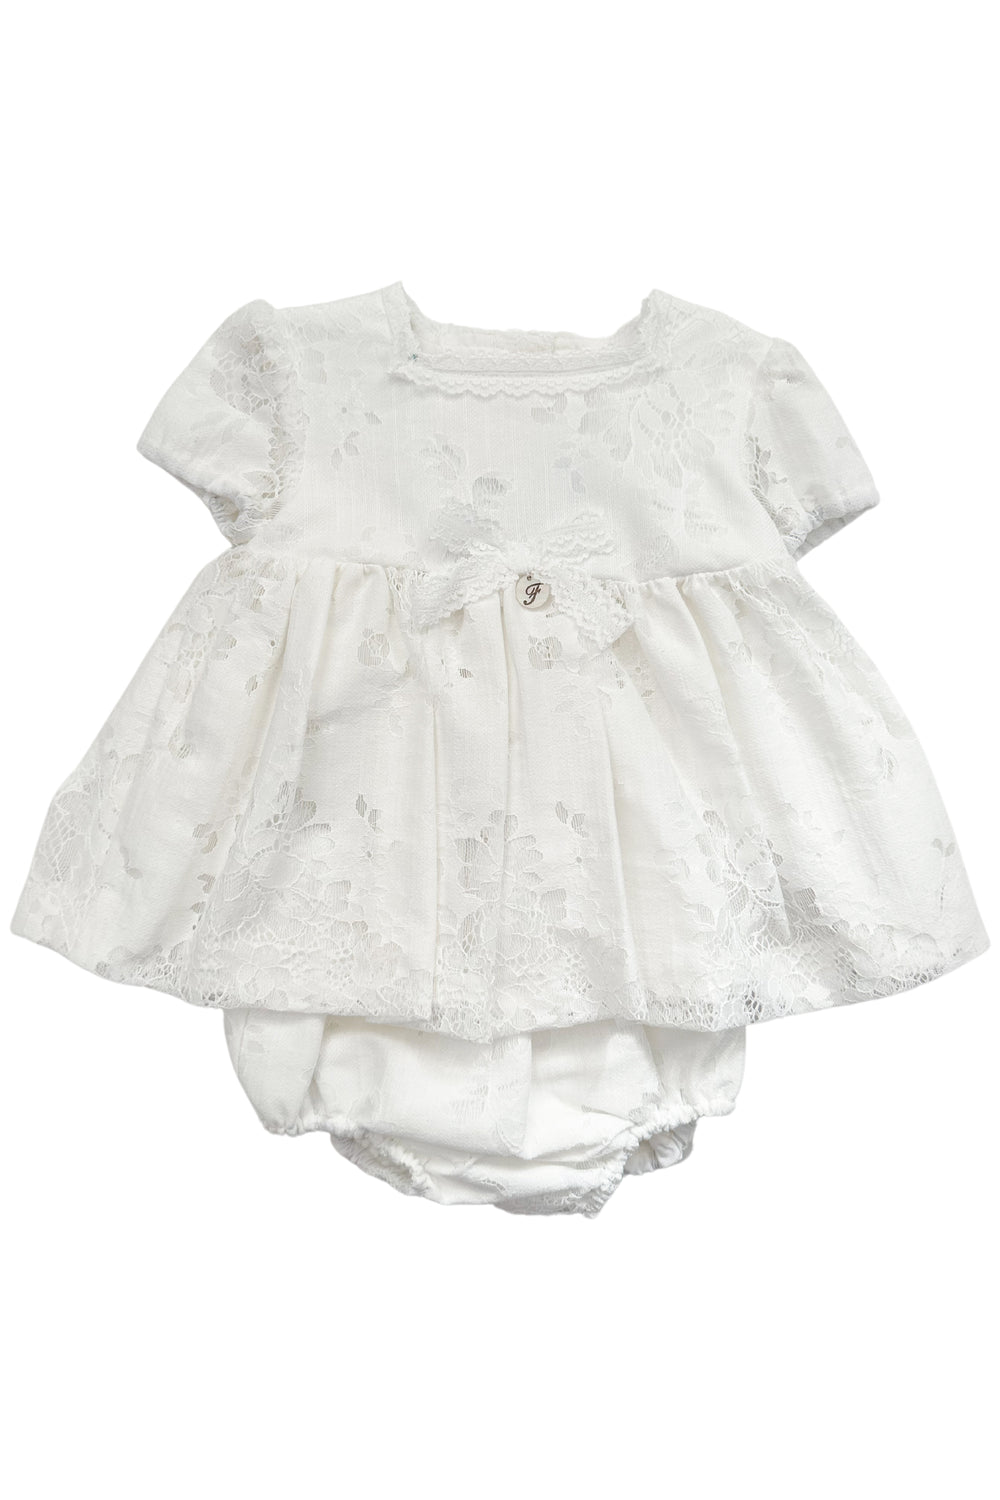 Foque PREORDER "Ayda" Ivory Lace Dress & Bloomers | Millie and John